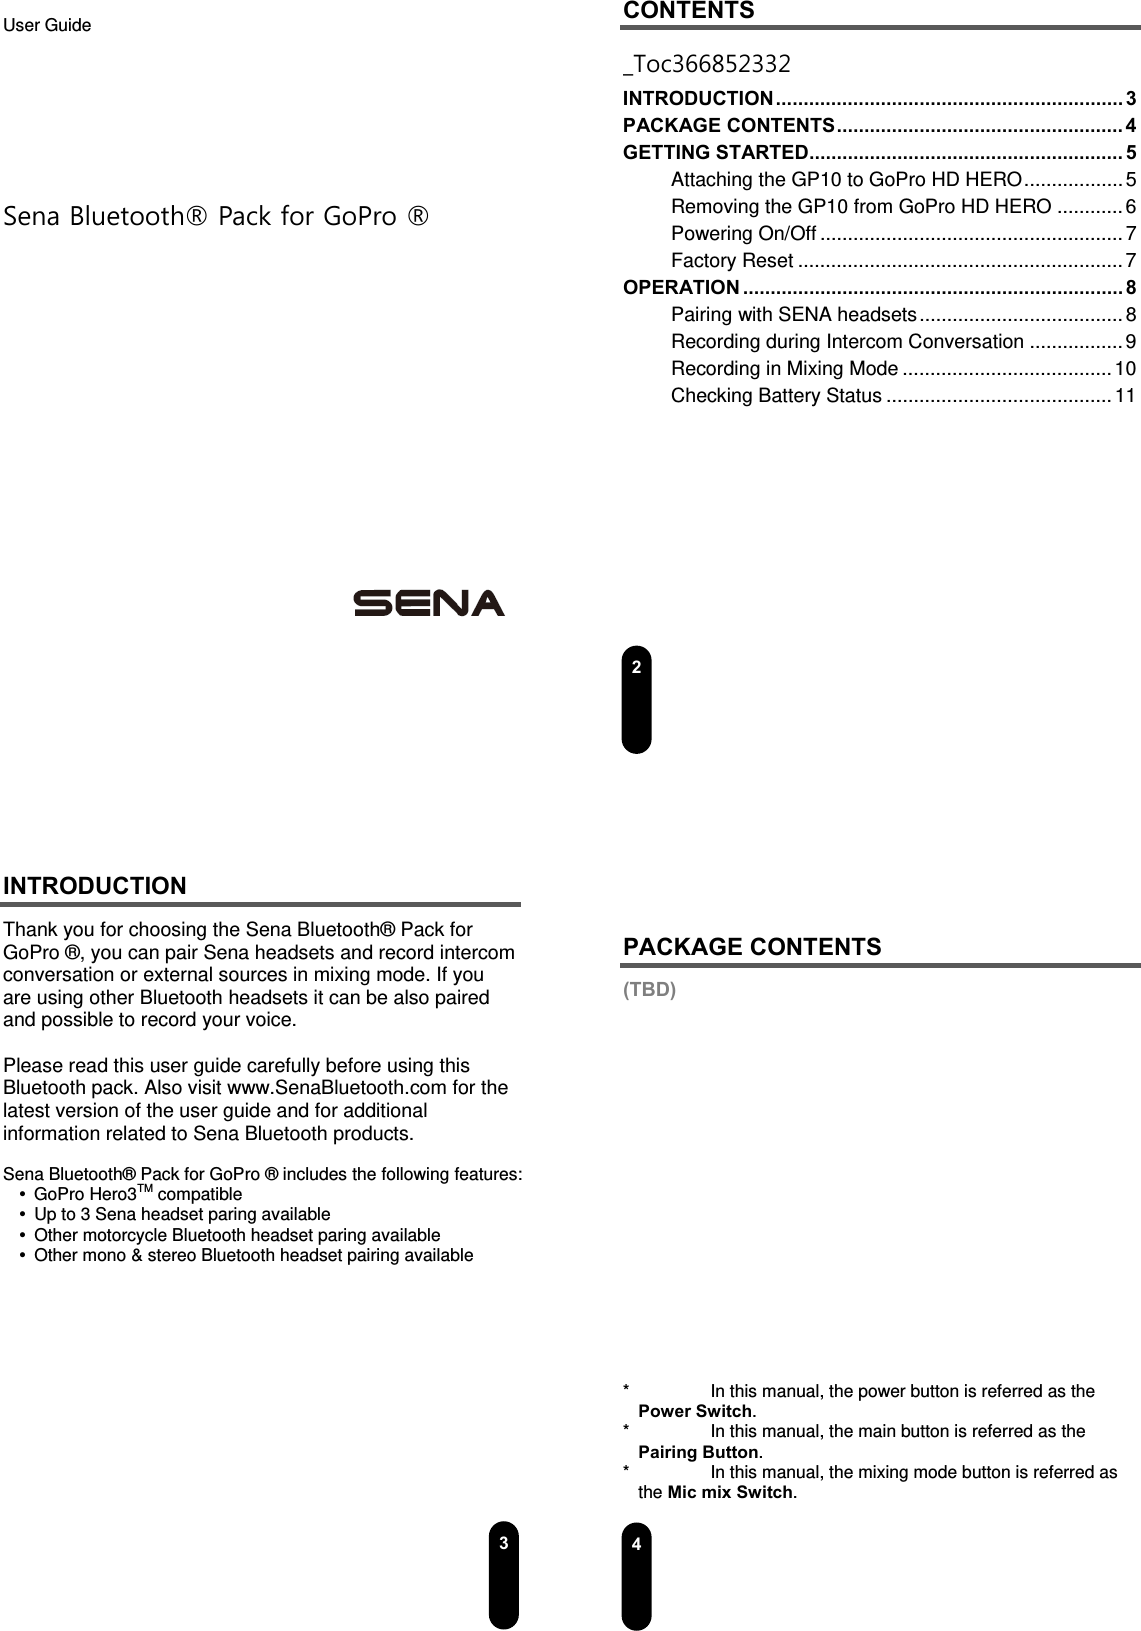  User Guide         Sena Bluetooth® Pack for GoPro ®                  2CONTENTS _Toc366852332 INTRODUCTION ............................................................... 3  PACKAGE CONTENTS .................................................... 4 GETTING STARTED ......................................................... 5  Attaching the GP10 to GoPro HD HERO .................. 5 Removing the GP10 from GoPro HD HERO ............ 6 Powering On/Off ....................................................... 7 Factory Reset ........................................................... 7 OPERATION ..................................................................... 8  Pairing with SENA headsets ..................................... 8 Recording during Intercom Conversation ................. 9 Recording in Mixing Mode ...................................... 10 Checking Battery Status ......................................... 11         3INTRODUCTION Thank you for choosing the Sena Bluetooth® Pack for GoPro ®, you can pair Sena headsets and record intercom conversation or external sources in mixing mode. If you are using other Bluetooth headsets it can be also paired and possible to record your voice.  Please read this user guide carefully before using this Bluetooth pack. Also visit www.SenaBluetooth.com for the latest version of the user guide and for additional information related to Sena Bluetooth products.  Sena Bluetooth® Pack for GoPro ® includes the following features:  GoPro Hero3TM compatible   Up to 3 Sena headset paring available     Other motorcycle Bluetooth headset paring available   Other mono &amp; stereo Bluetooth headset pairing available             4   PACKAGE CONTENTS (TBD)                    *    In this manual, the power button is referred as the Power Switch. *    In this manual, the main button is referred as the Pairing Button. *    In this manual, the mixing mode button is referred as the Mic mix Switch. 